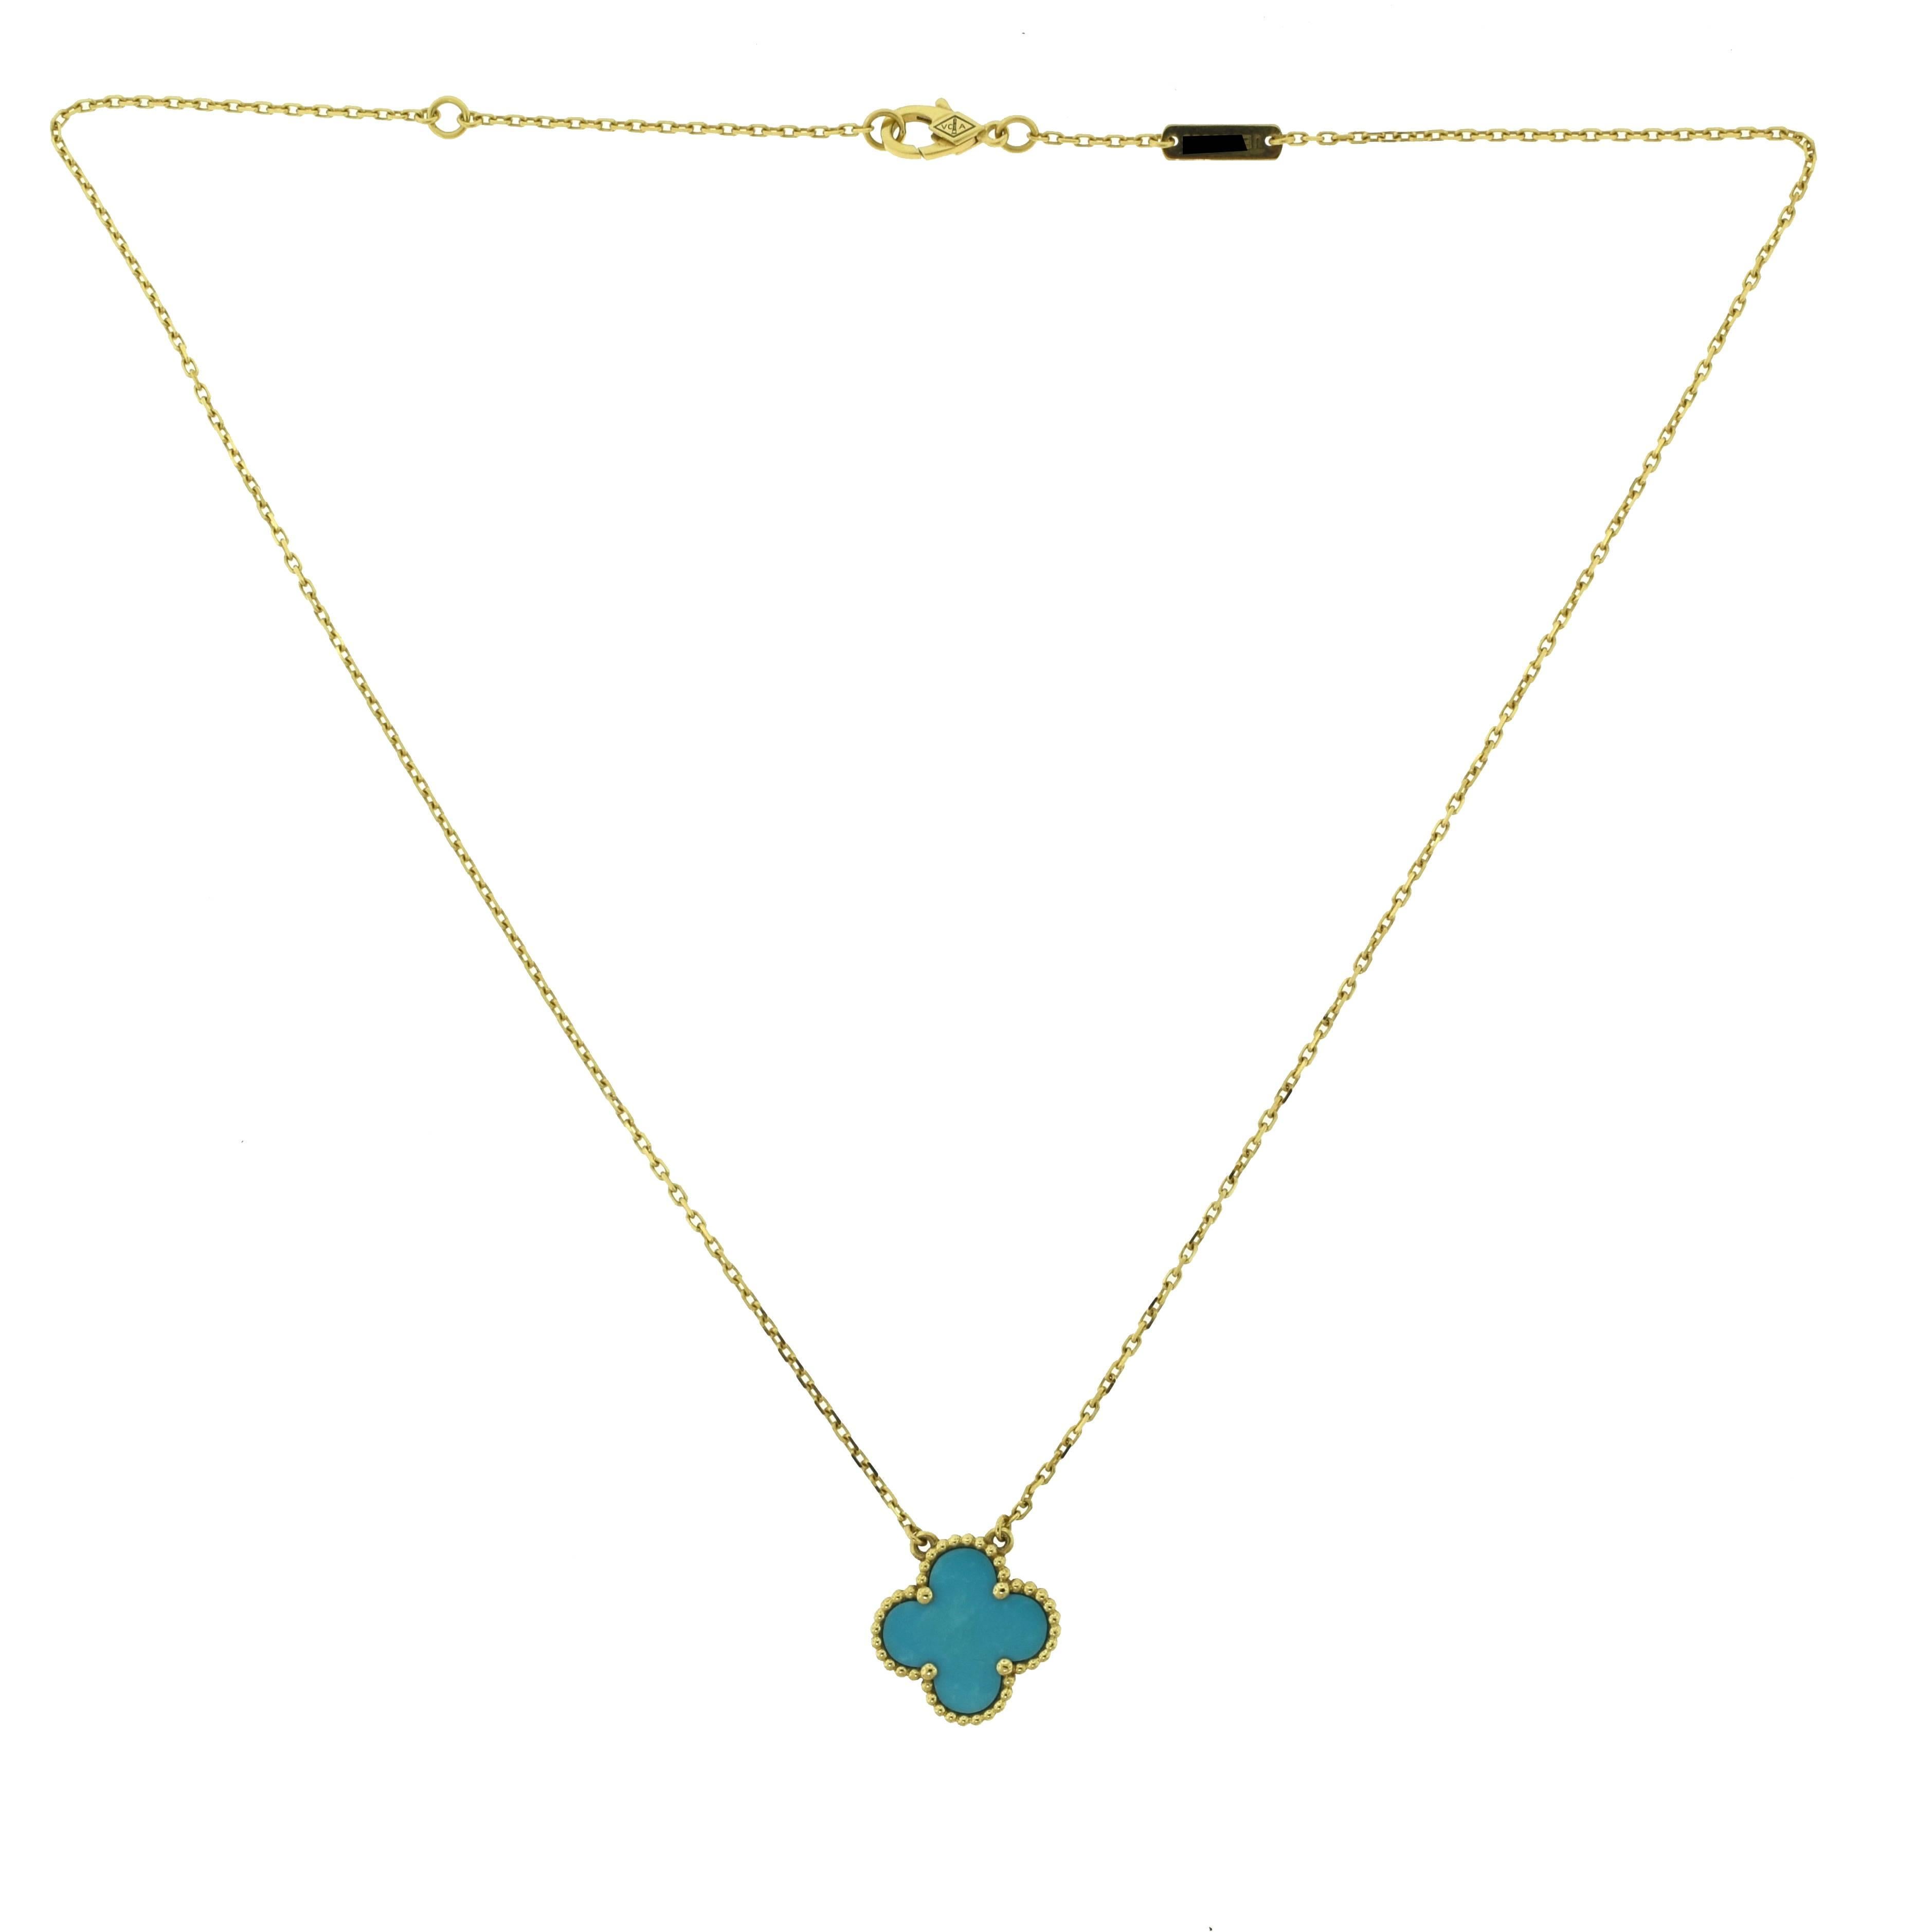 Designer: Van Cleef & Arpels
Collection: Vintage Alhambra
Style: Single 1 Motif Pendant Necklace
Metal: Yellow Gold
Metal Purity: 18k
Total Item Weight (g): 4.6
Necklace Length: 14.75 inches, 16 inches
Motif Dimensions: 14.85 x 12.75 mm
Motif